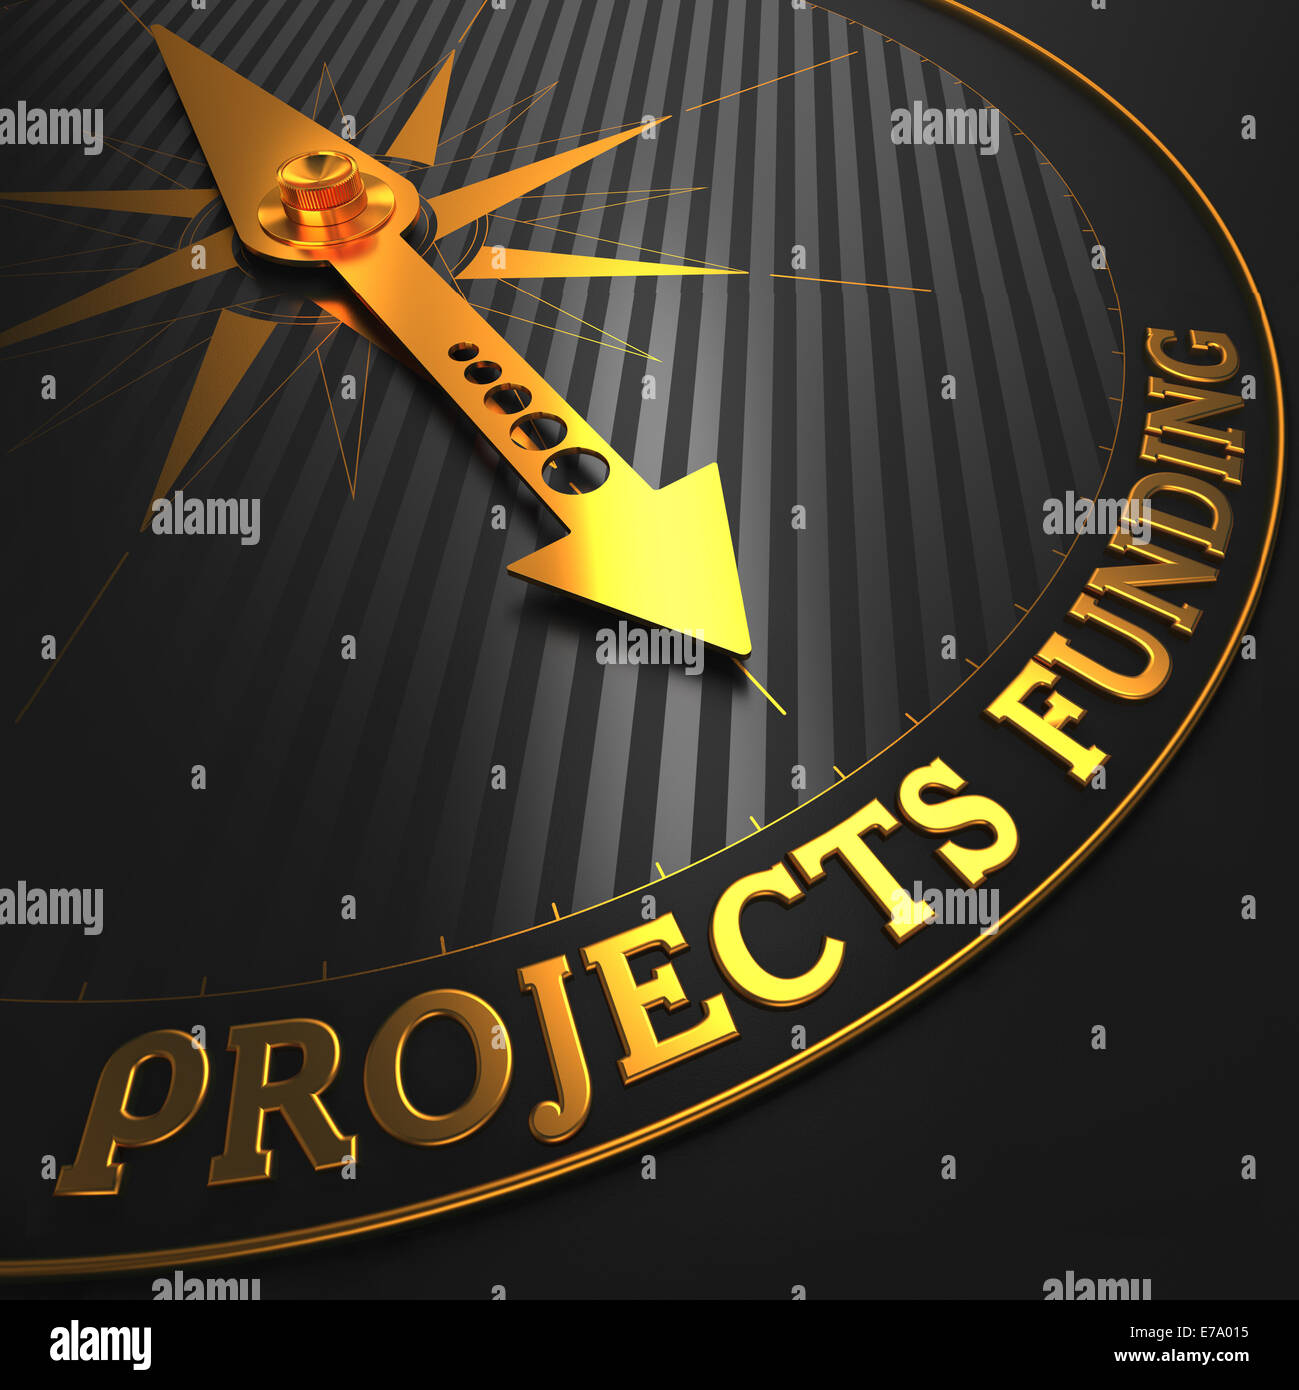 Projects Funding on Golden Compass Needle. Stock Photo